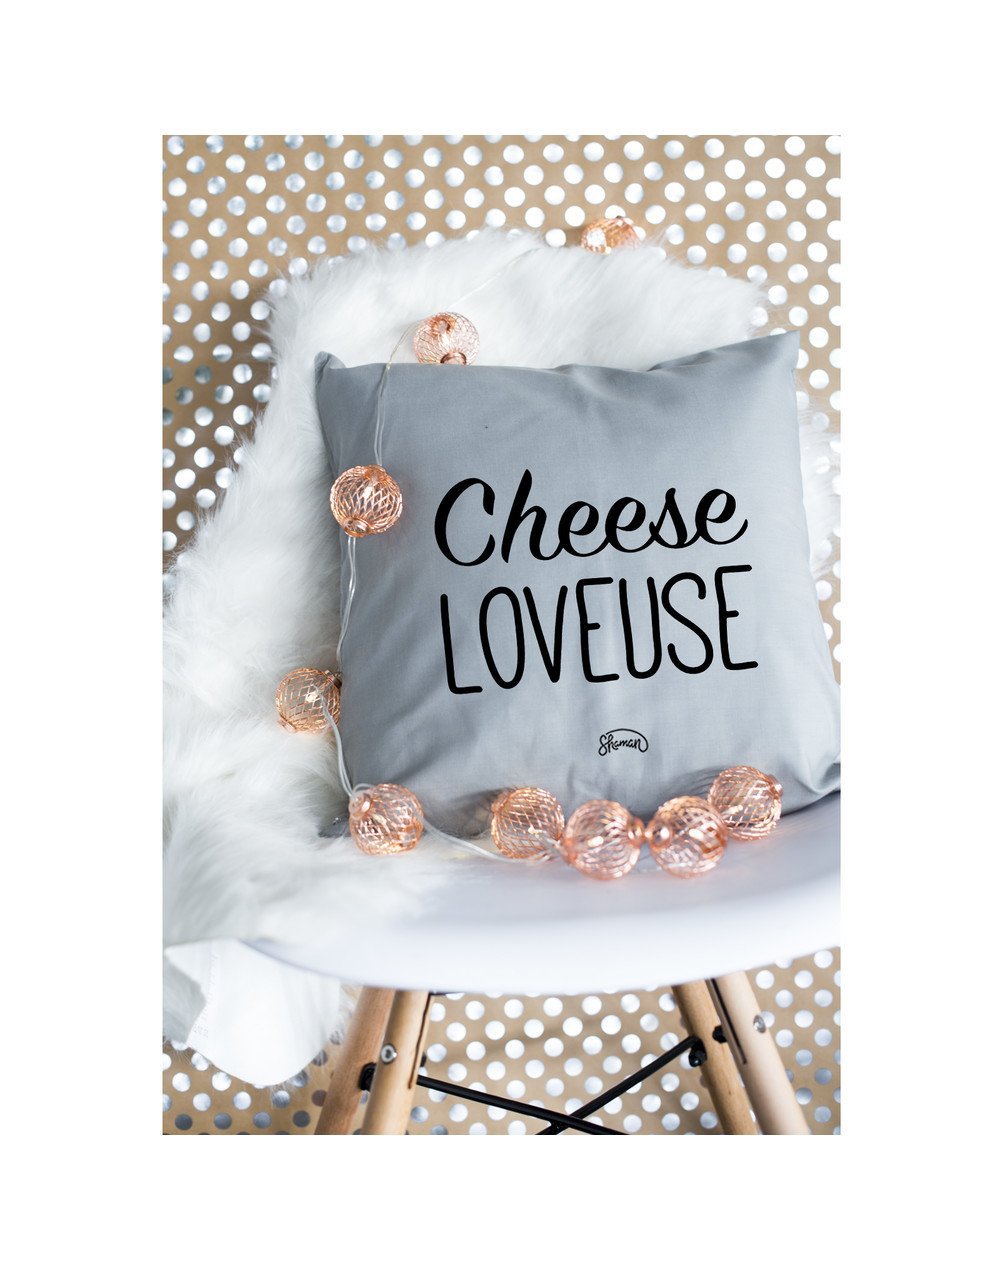 Coussin "Cheese loveuse"